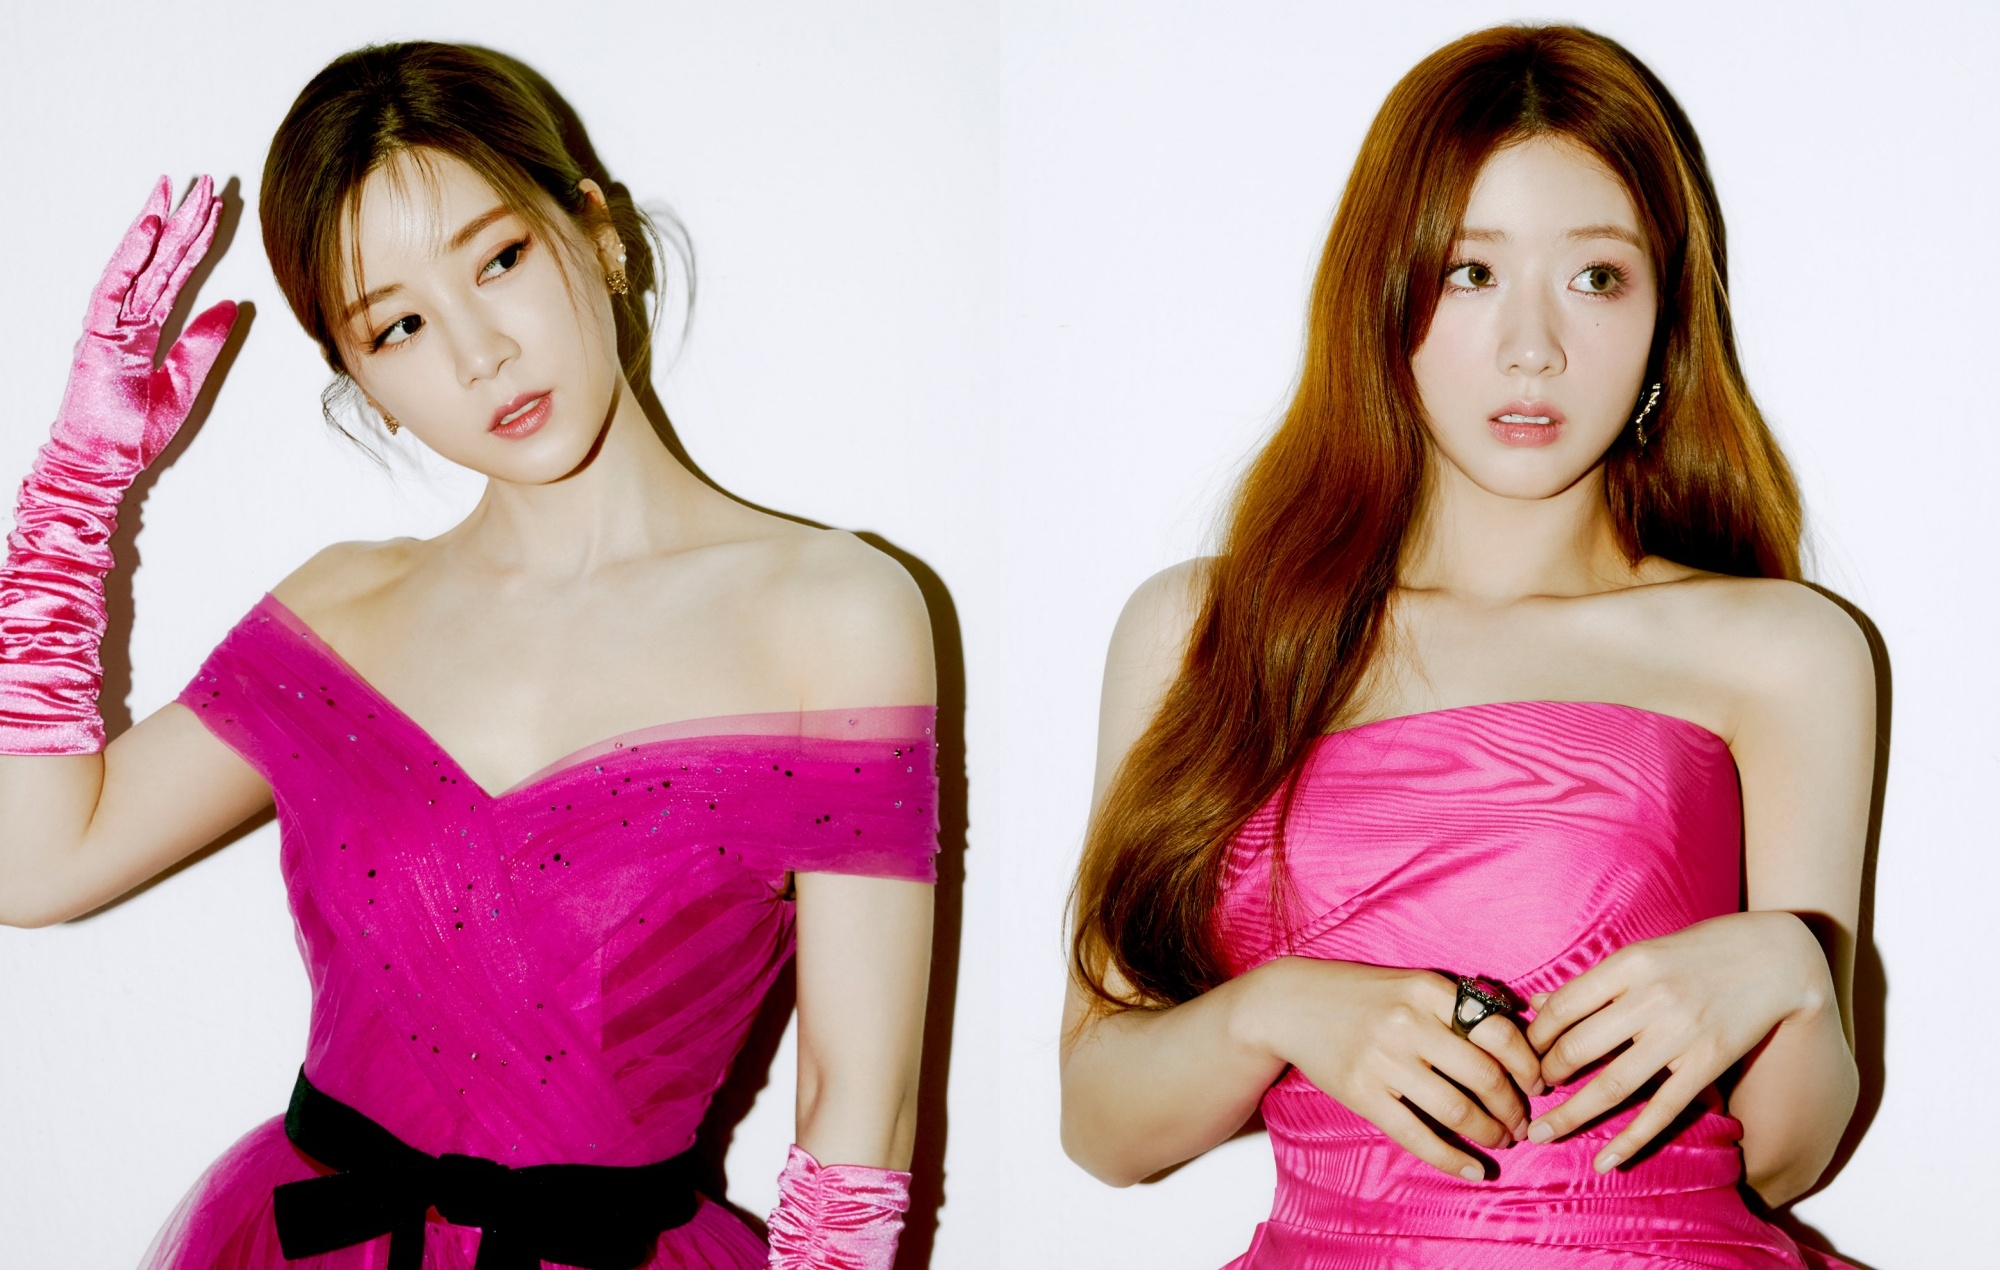 Apink music, Sub unit debut, Chorong and Bomi, New music from Apink, 2000x1270 HD Desktop